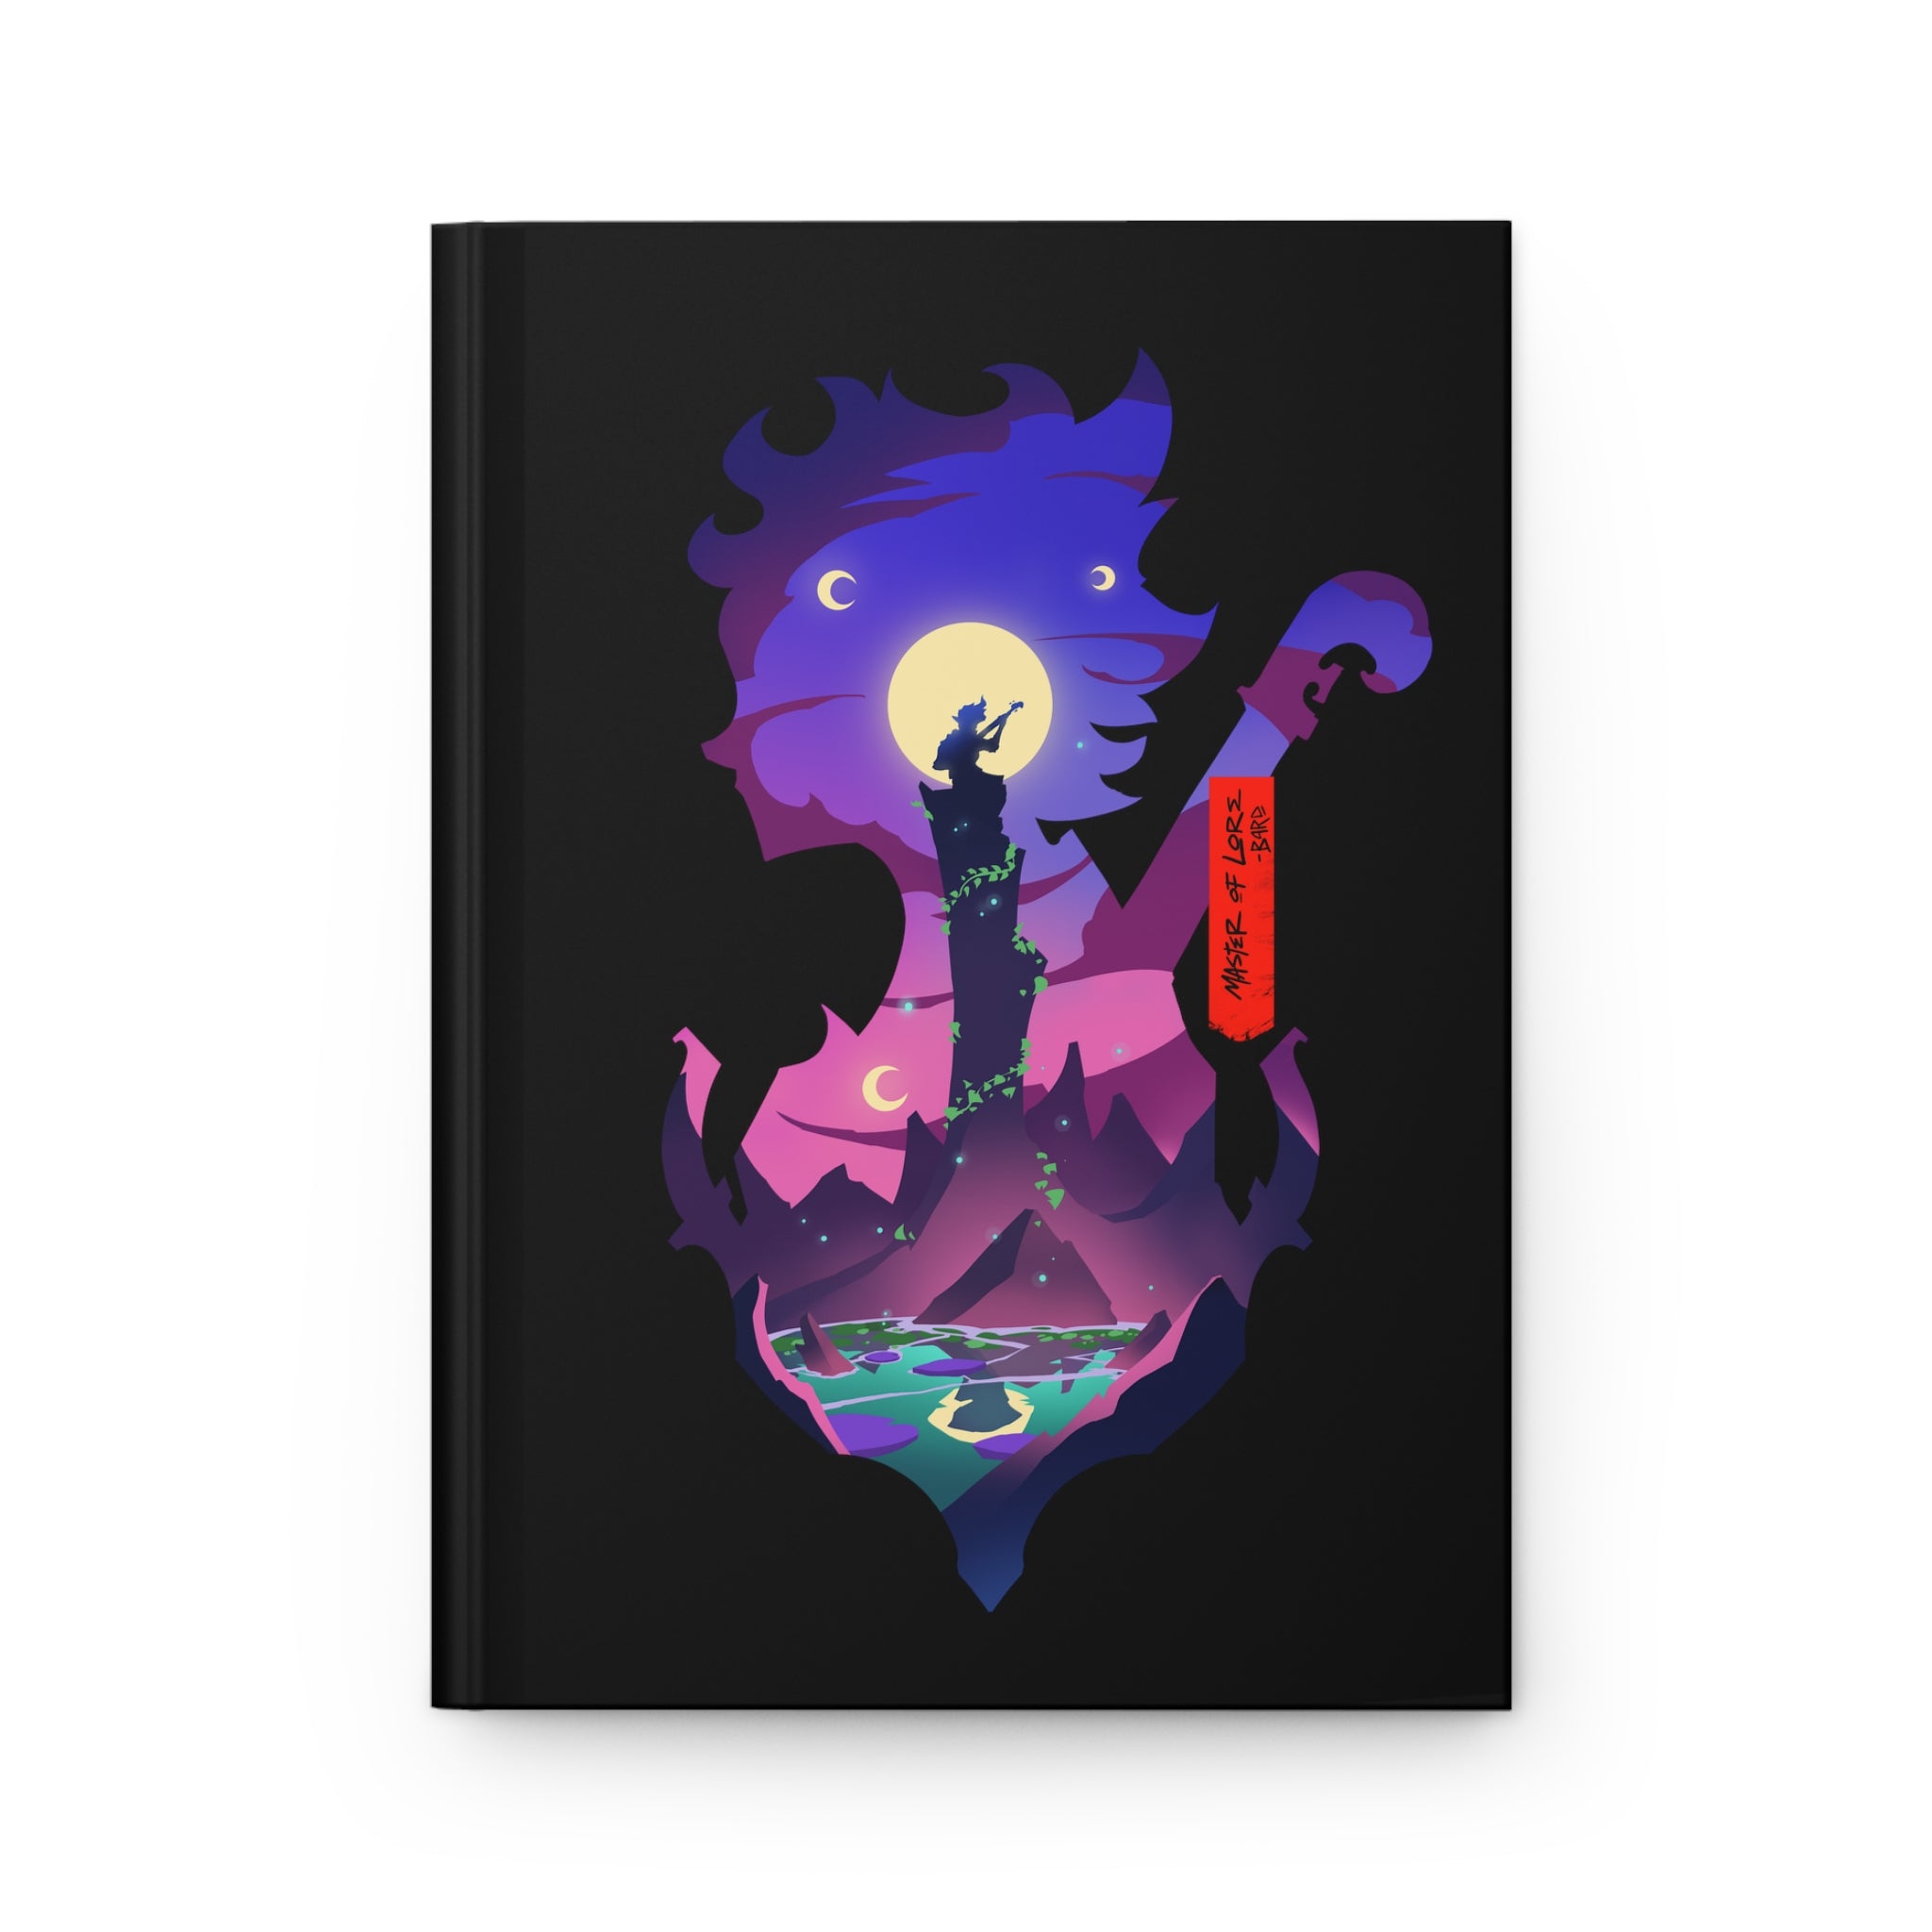 BARD CLASS SILHOUETTE HARDCOVER CAMPAIGN JOURNAL